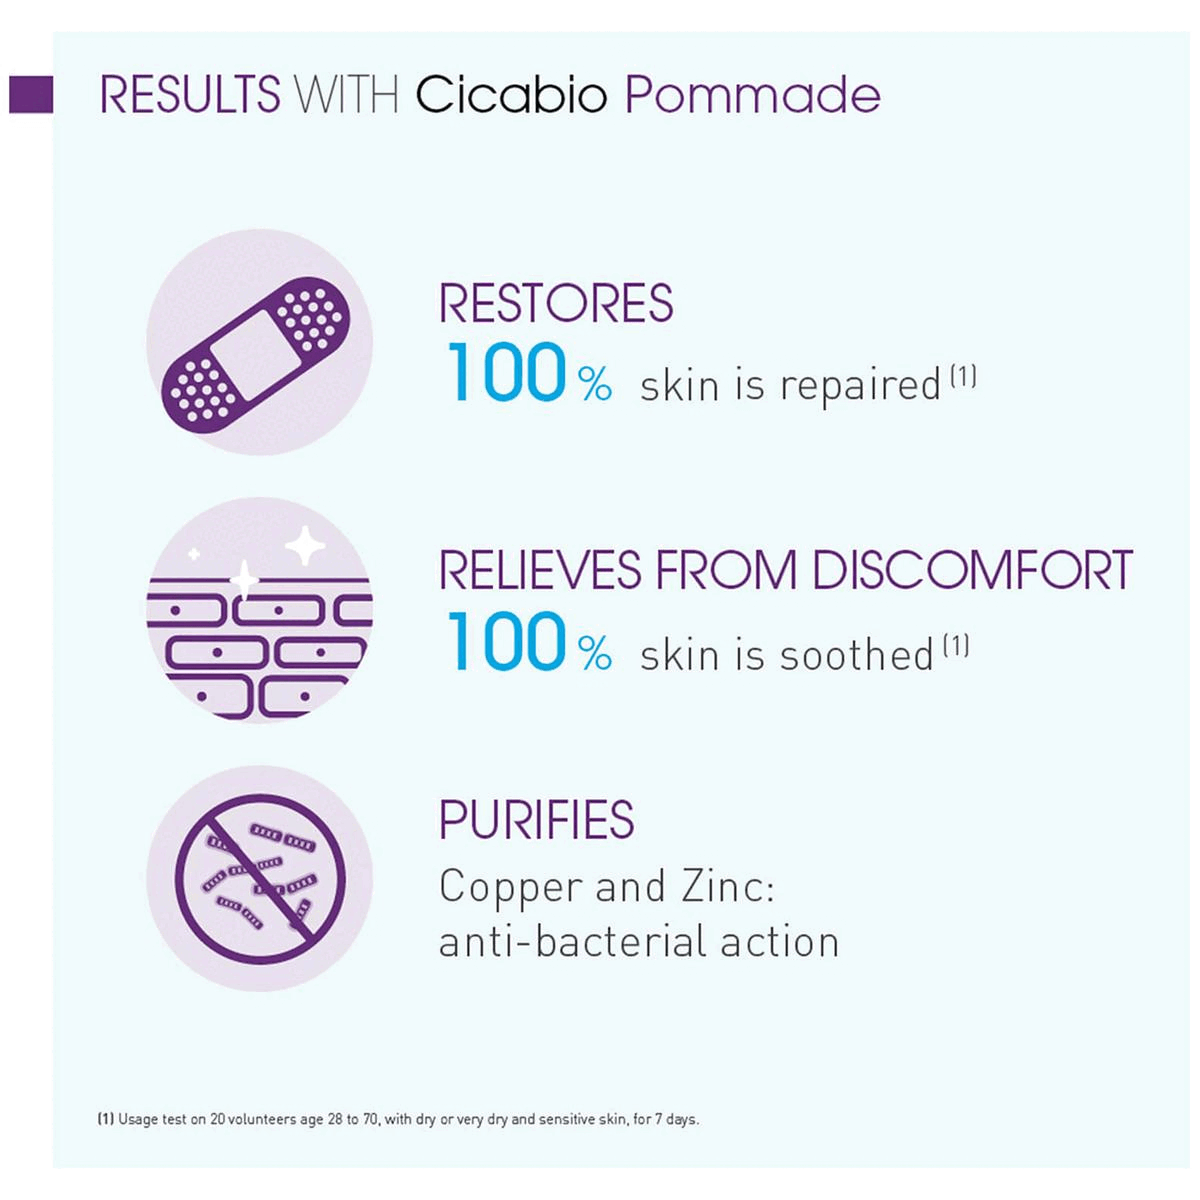 Results with Cicabio pommade. Your routine with Cicabio pommade